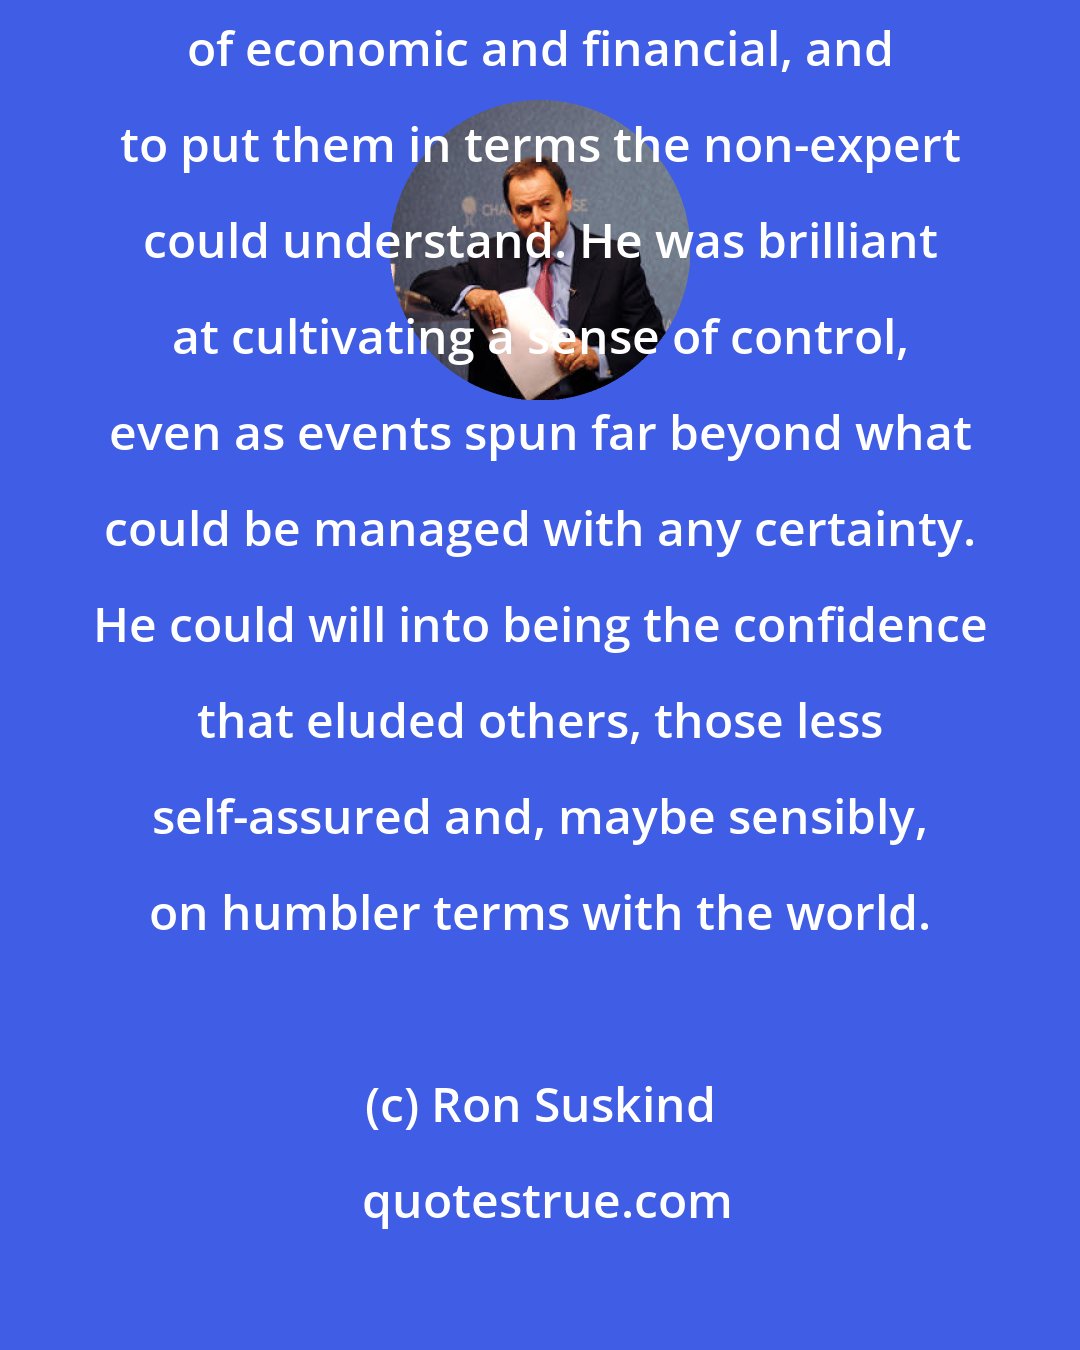 Ron Suskind: Summers was simply a master explainer, able to deftly boil down the complexities of economic and financial, and to put them in terms the non-expert could understand. He was brilliant at cultivating a sense of control, even as events spun far beyond what could be managed with any certainty. He could will into being the confidence that eluded others, those less self-assured and, maybe sensibly, on humbler terms with the world.